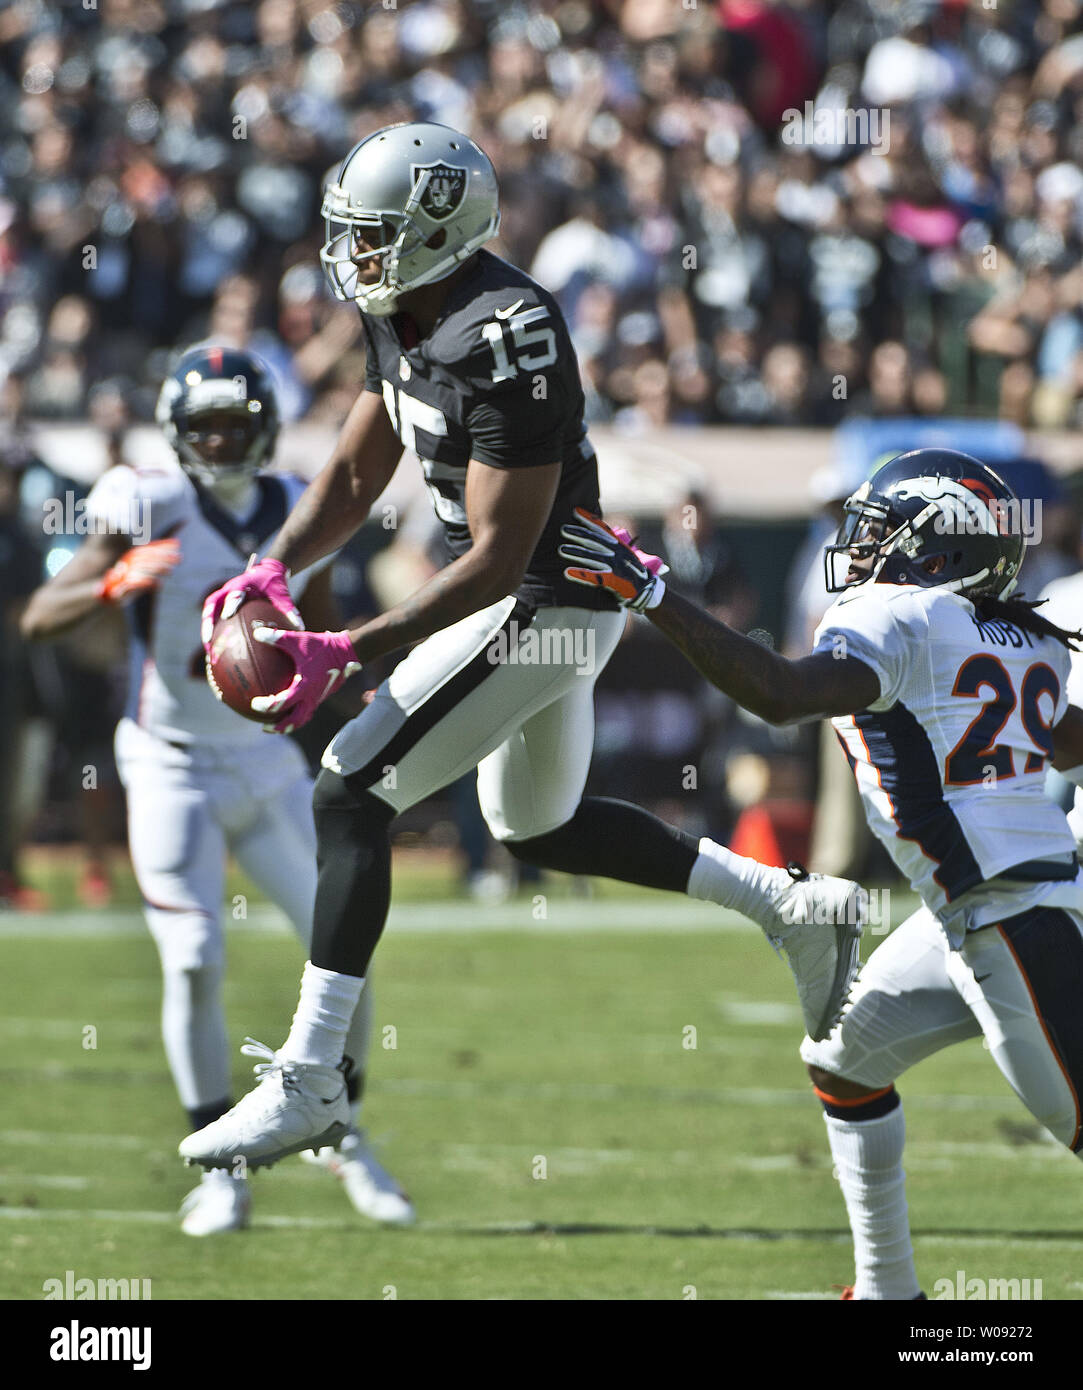 Oakland Raiders WR Michael Crabtree (15) catches a Derek Carr pass for 25 yards against the Denver Broncos Bradley Roby (R) in the first quarter at O.co Coliseum in Oakland, California on October 11, 2015. The Broncos defeated the Raiders 16-10.  Photo by Terry Schmitt/UPI Stock Photo